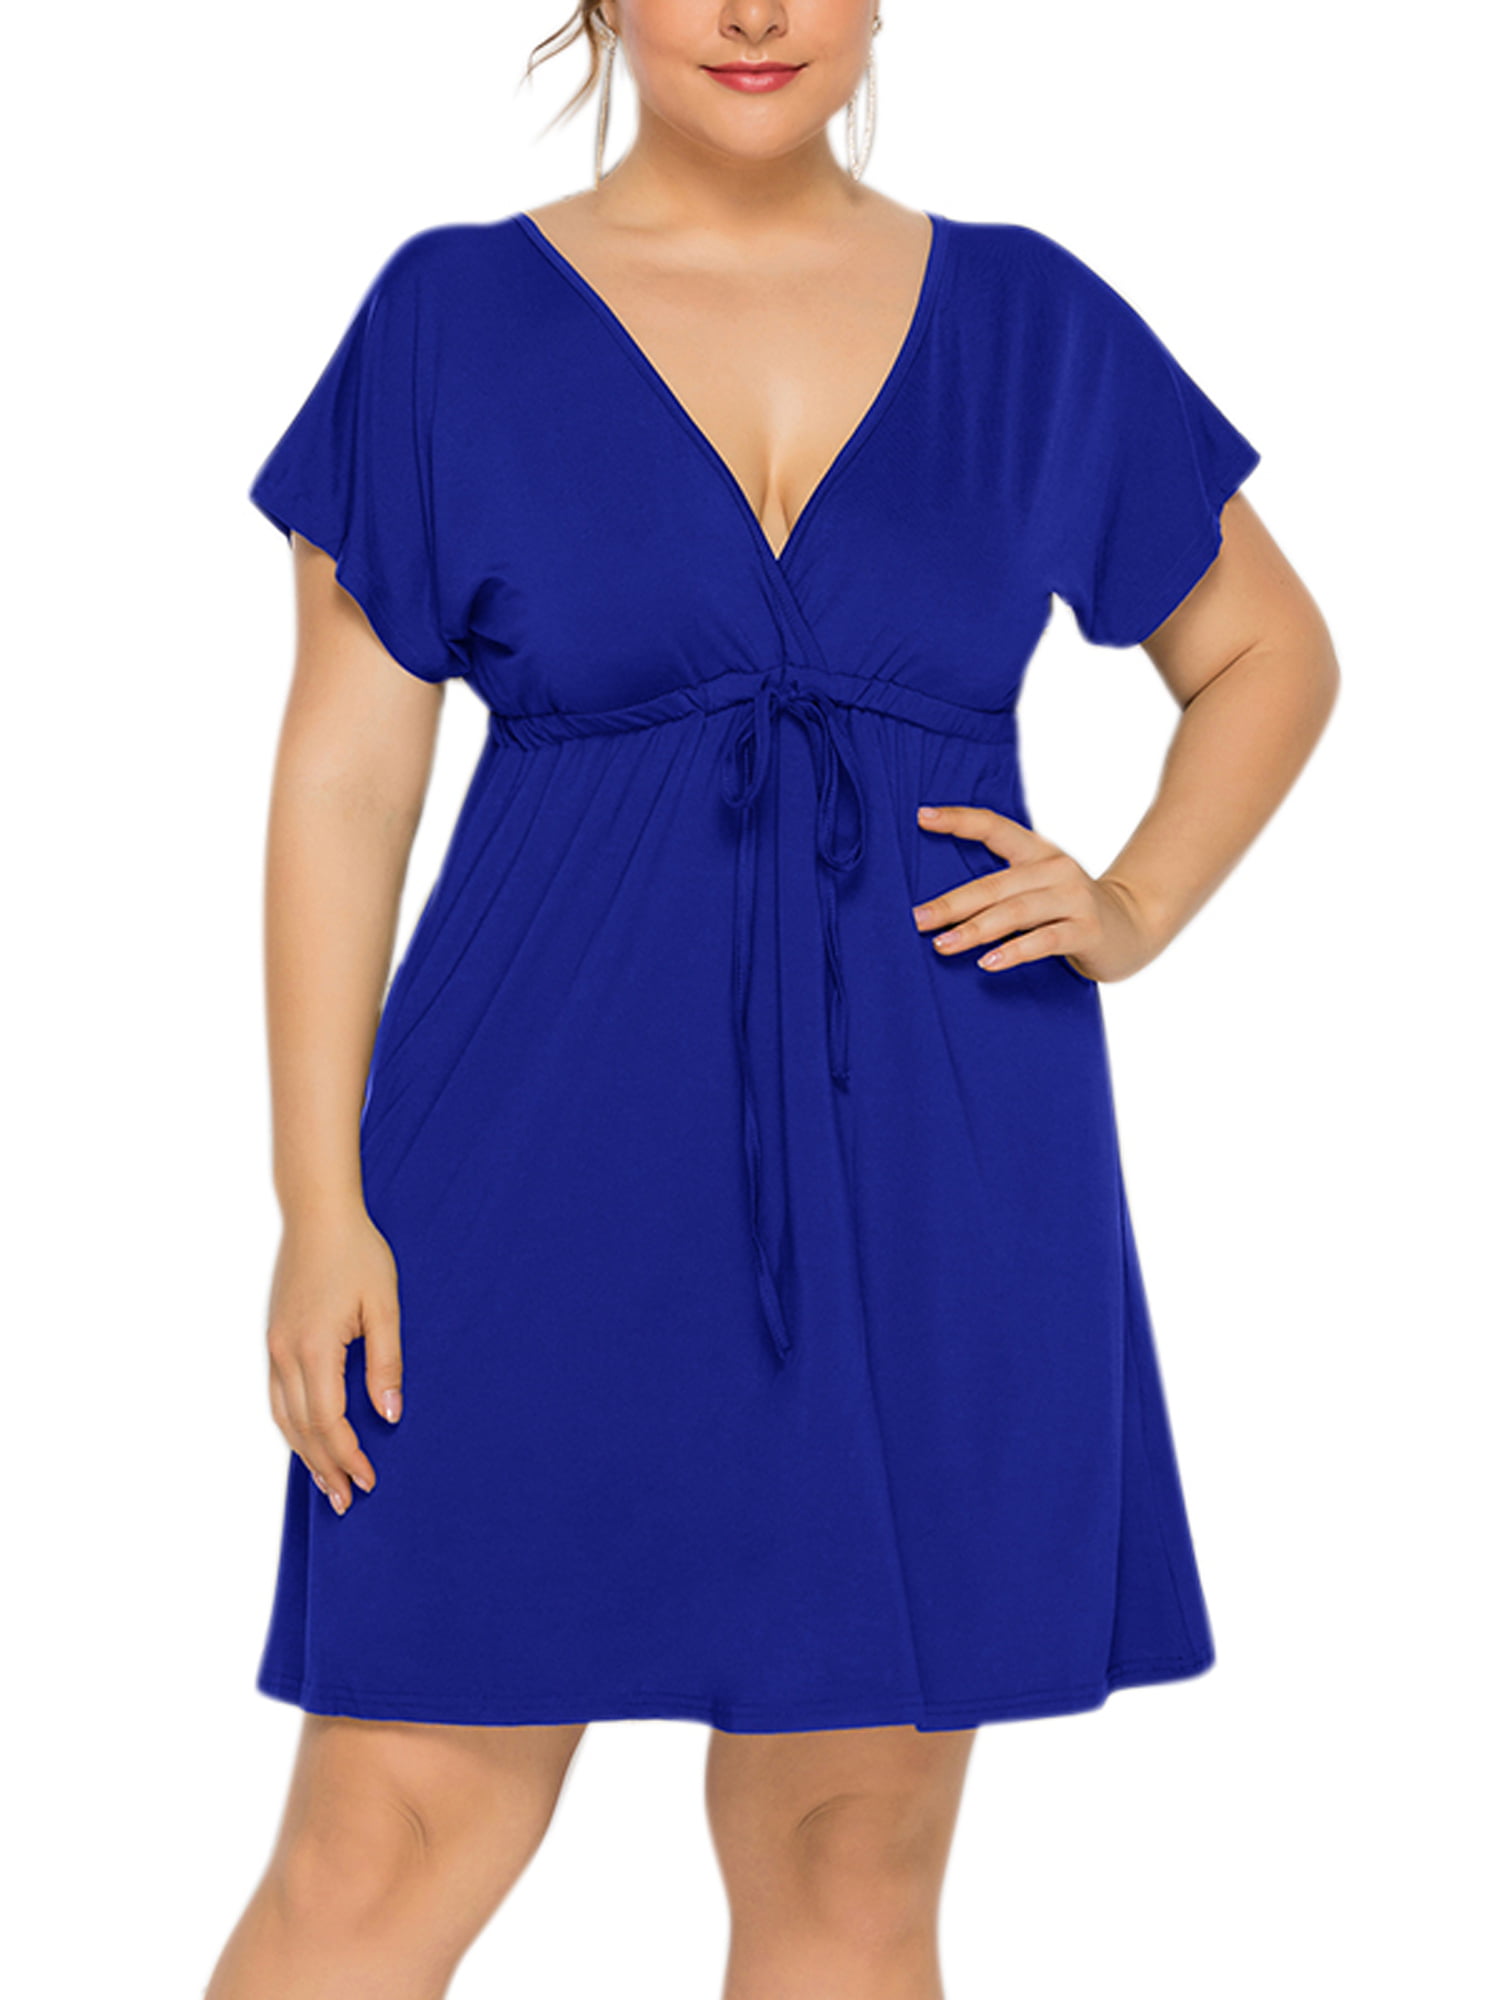 UPAIRC Women's Plus Size Sexy V Neck Lace Up Sundress Party Summer ...